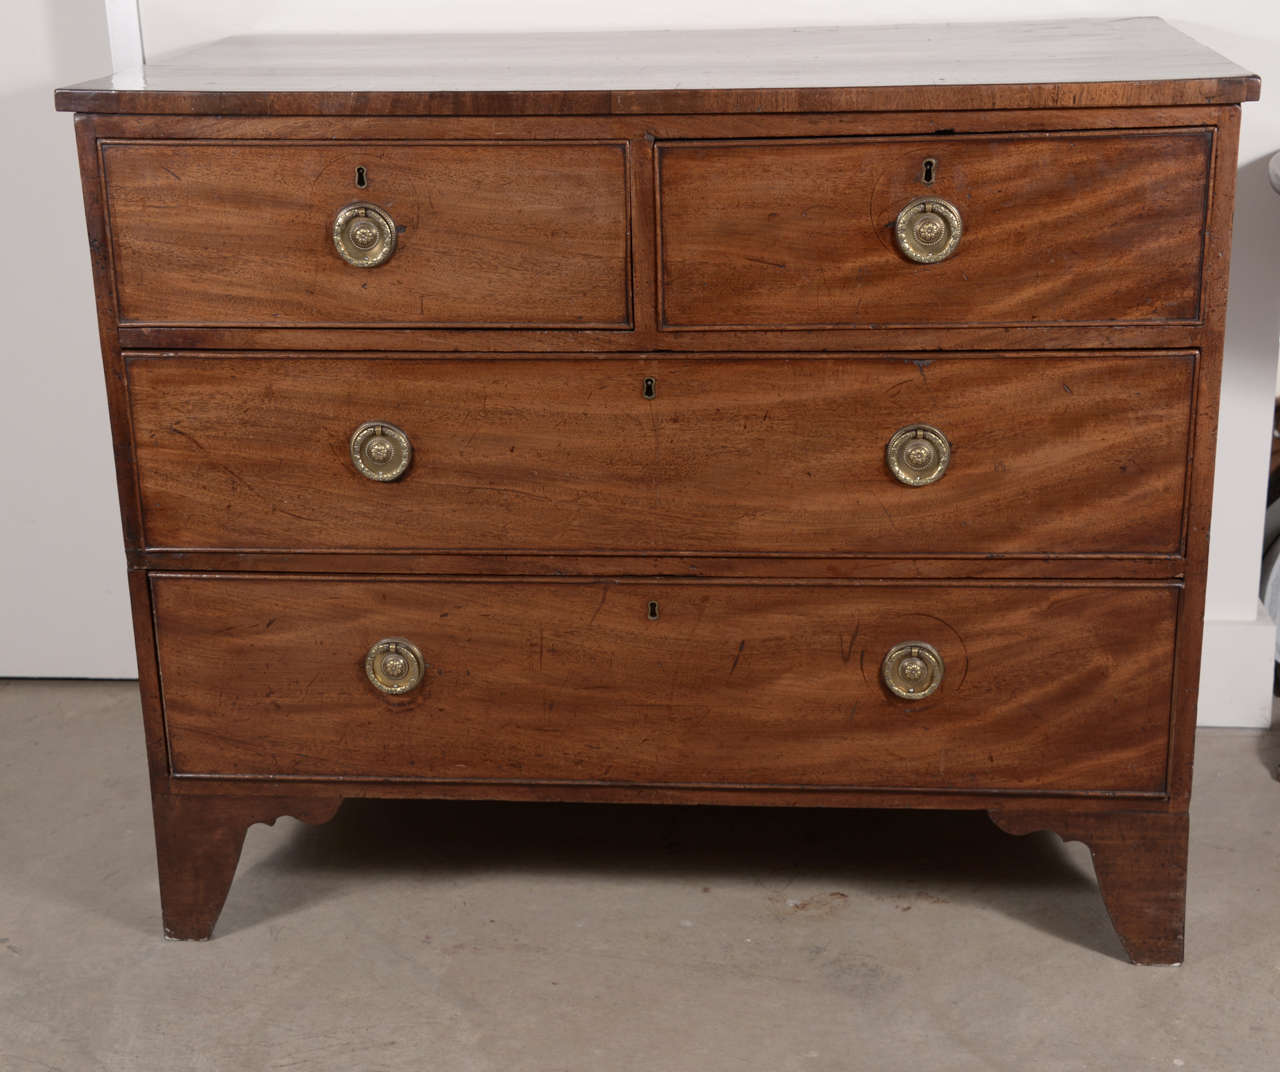 18th century English mahogany chest with four drawers on bracket feet. Simple straight lines and beautiful patina. Brass circular pulls.